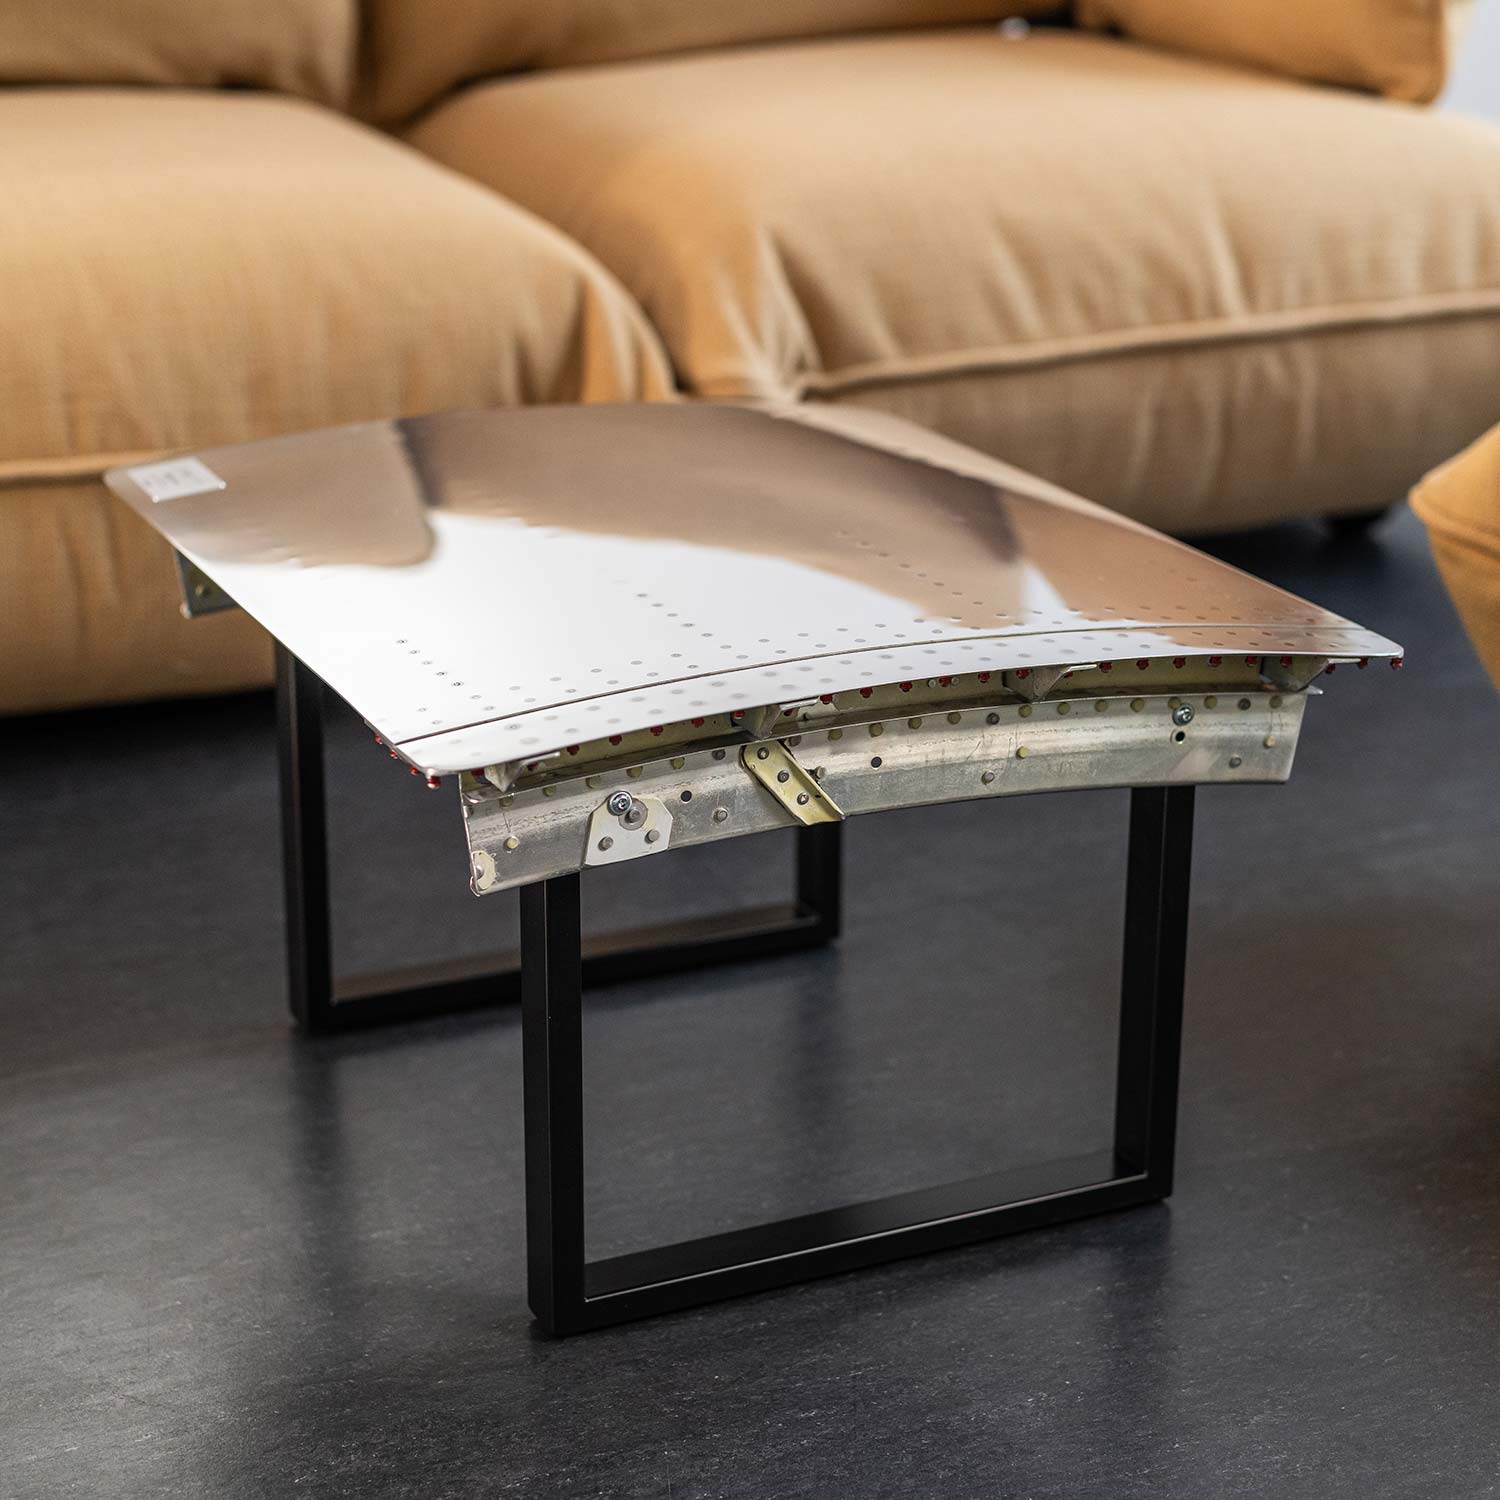 Side Table from Aircraft Parts, High-Gloss Polished, Frame: Black RAL 9011, approx. 62 x 59 cm